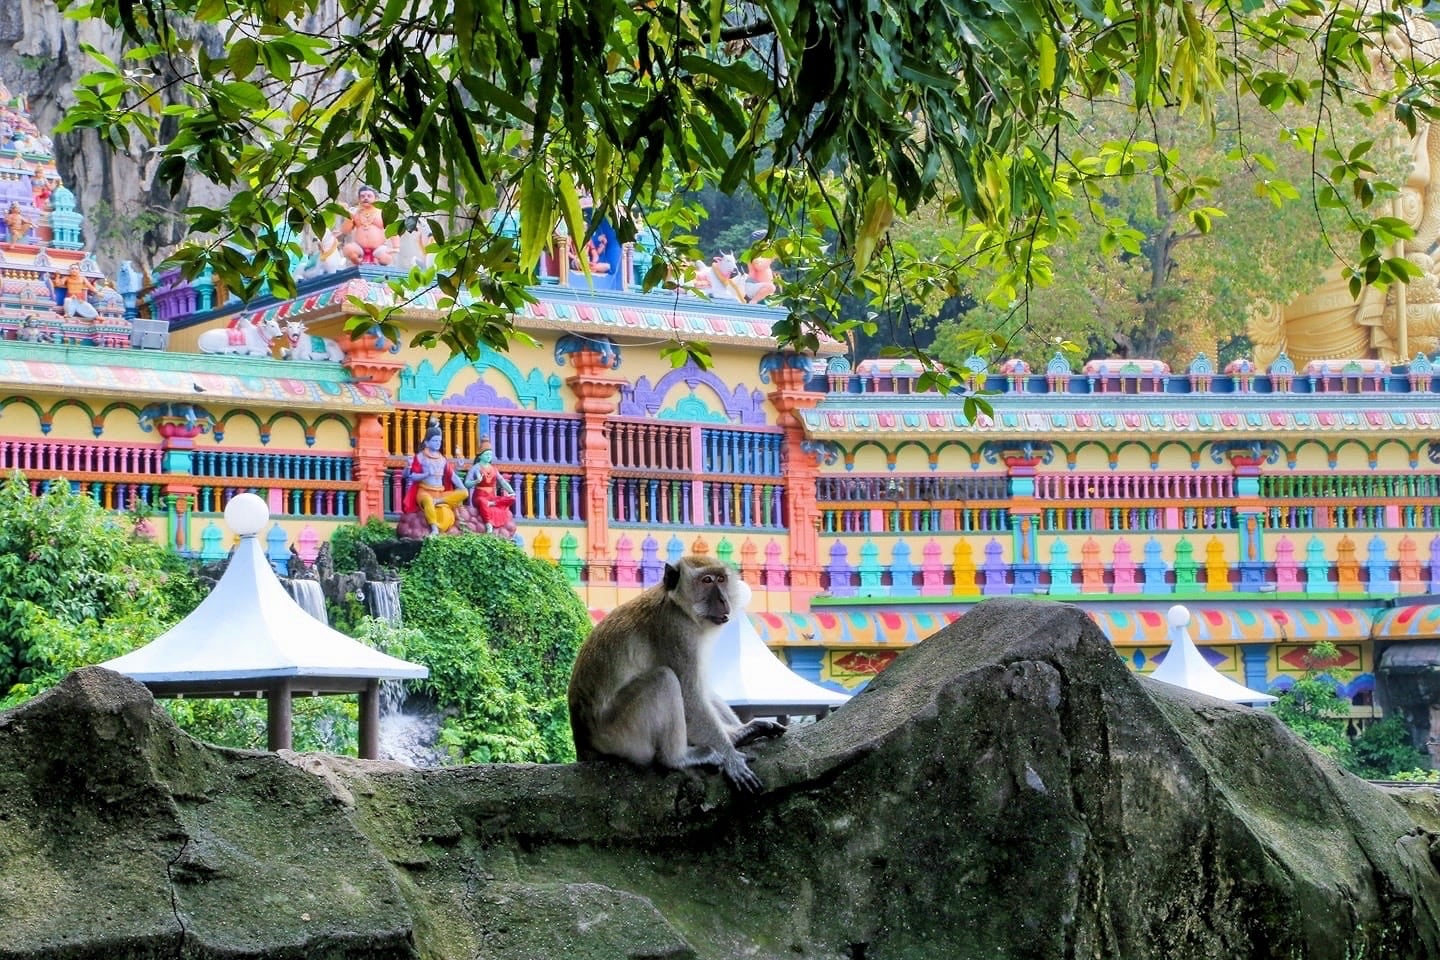 Macaque sitting on rock at Batu Caves Malaysia